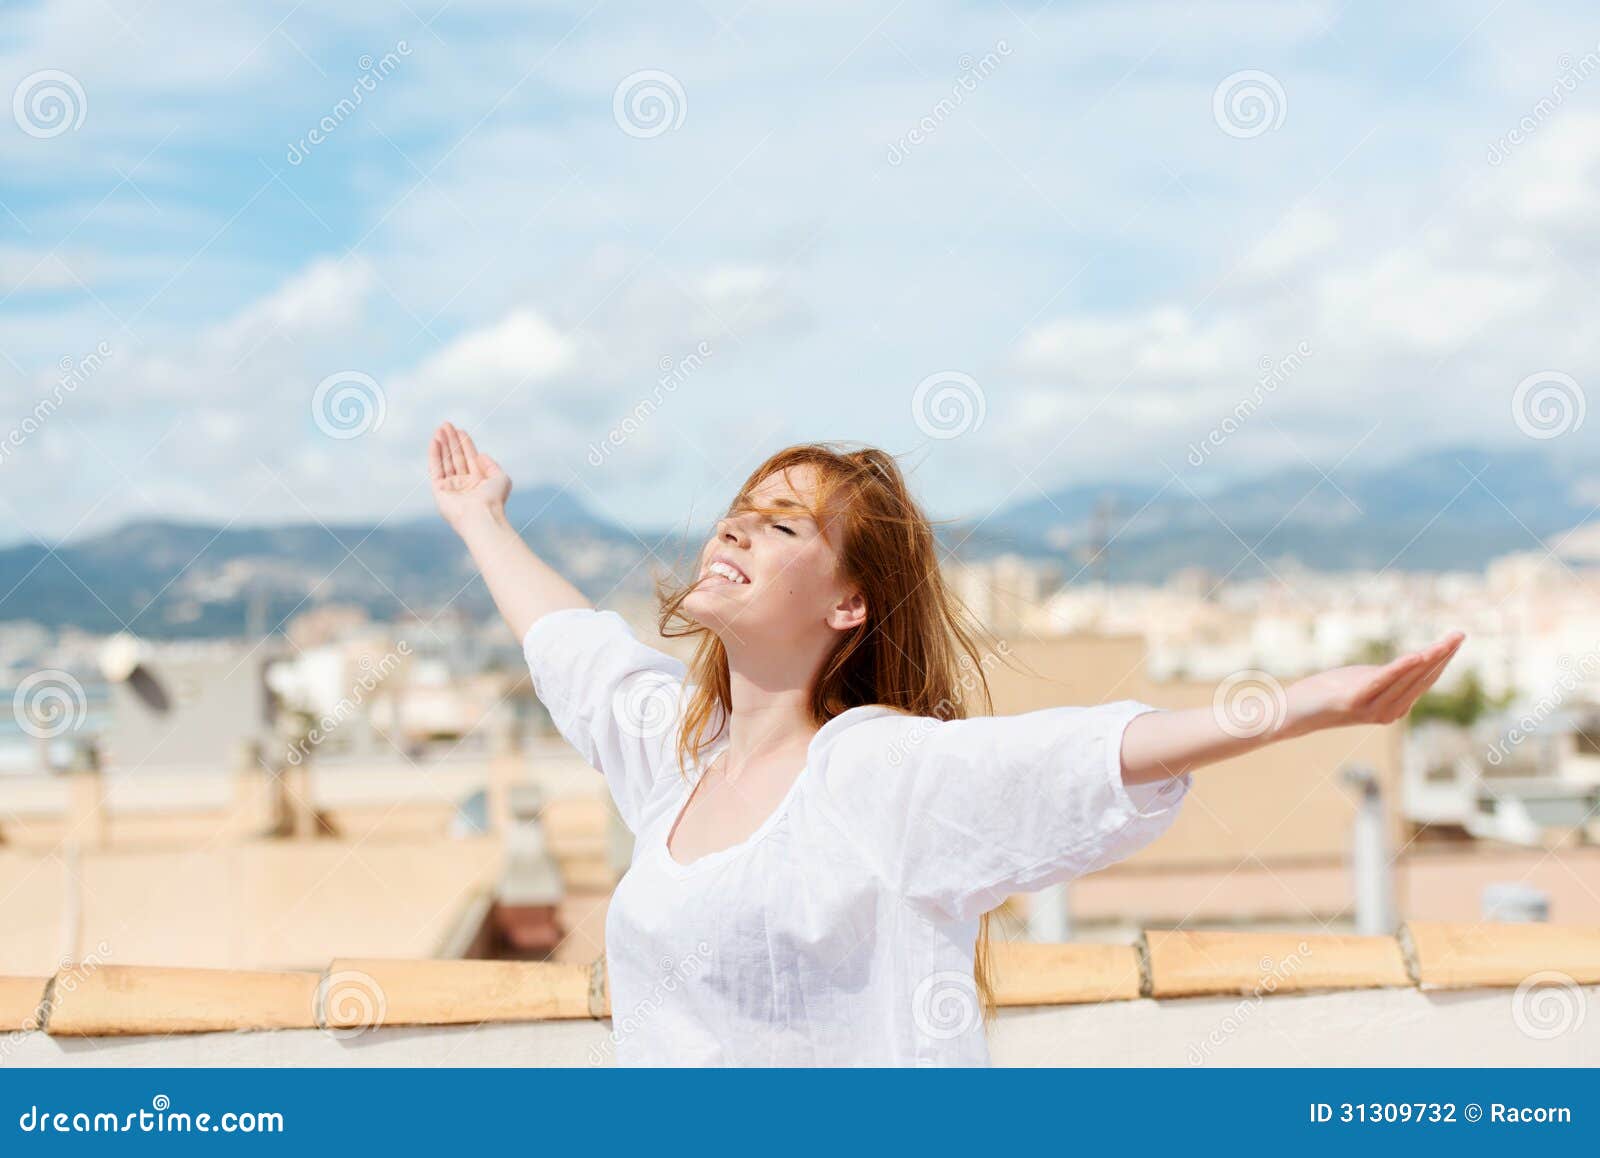 Woman on a Rooftop Embracing the Sunshine Stock Photo - Image of relax